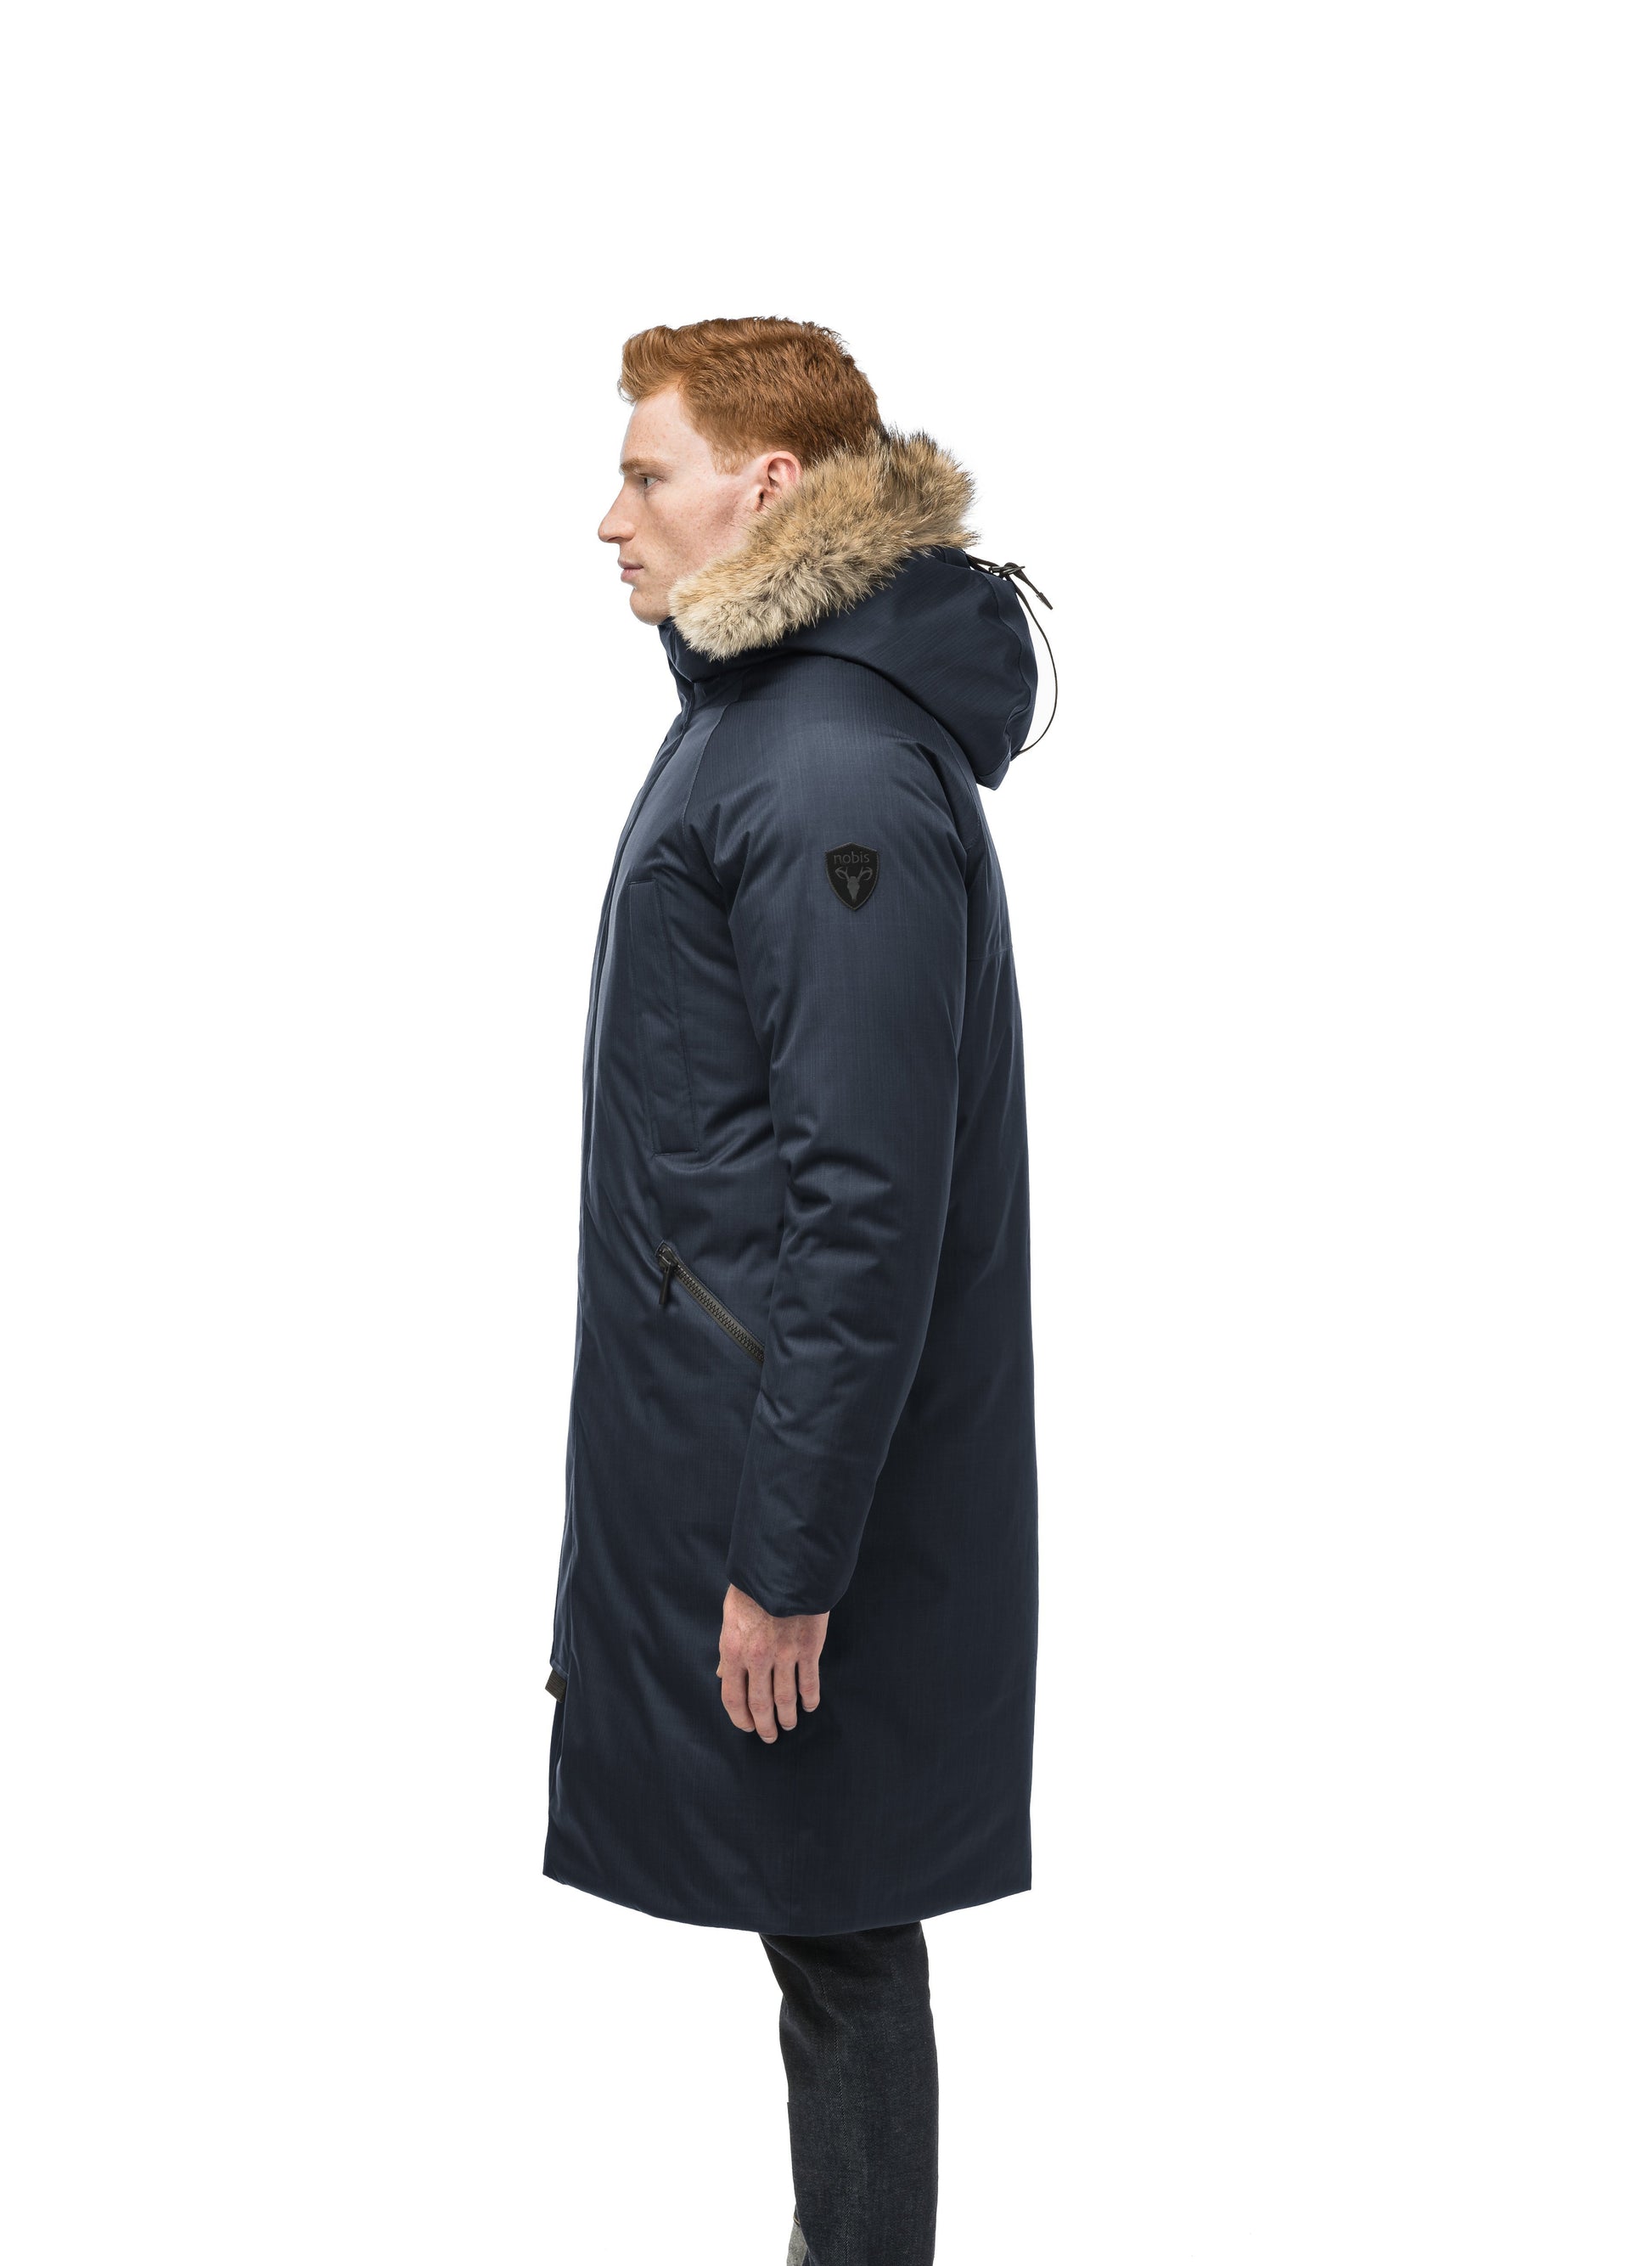 This ankle length men's down filled parka doubles as an over coat with a removable fur trim on the hood in Navy